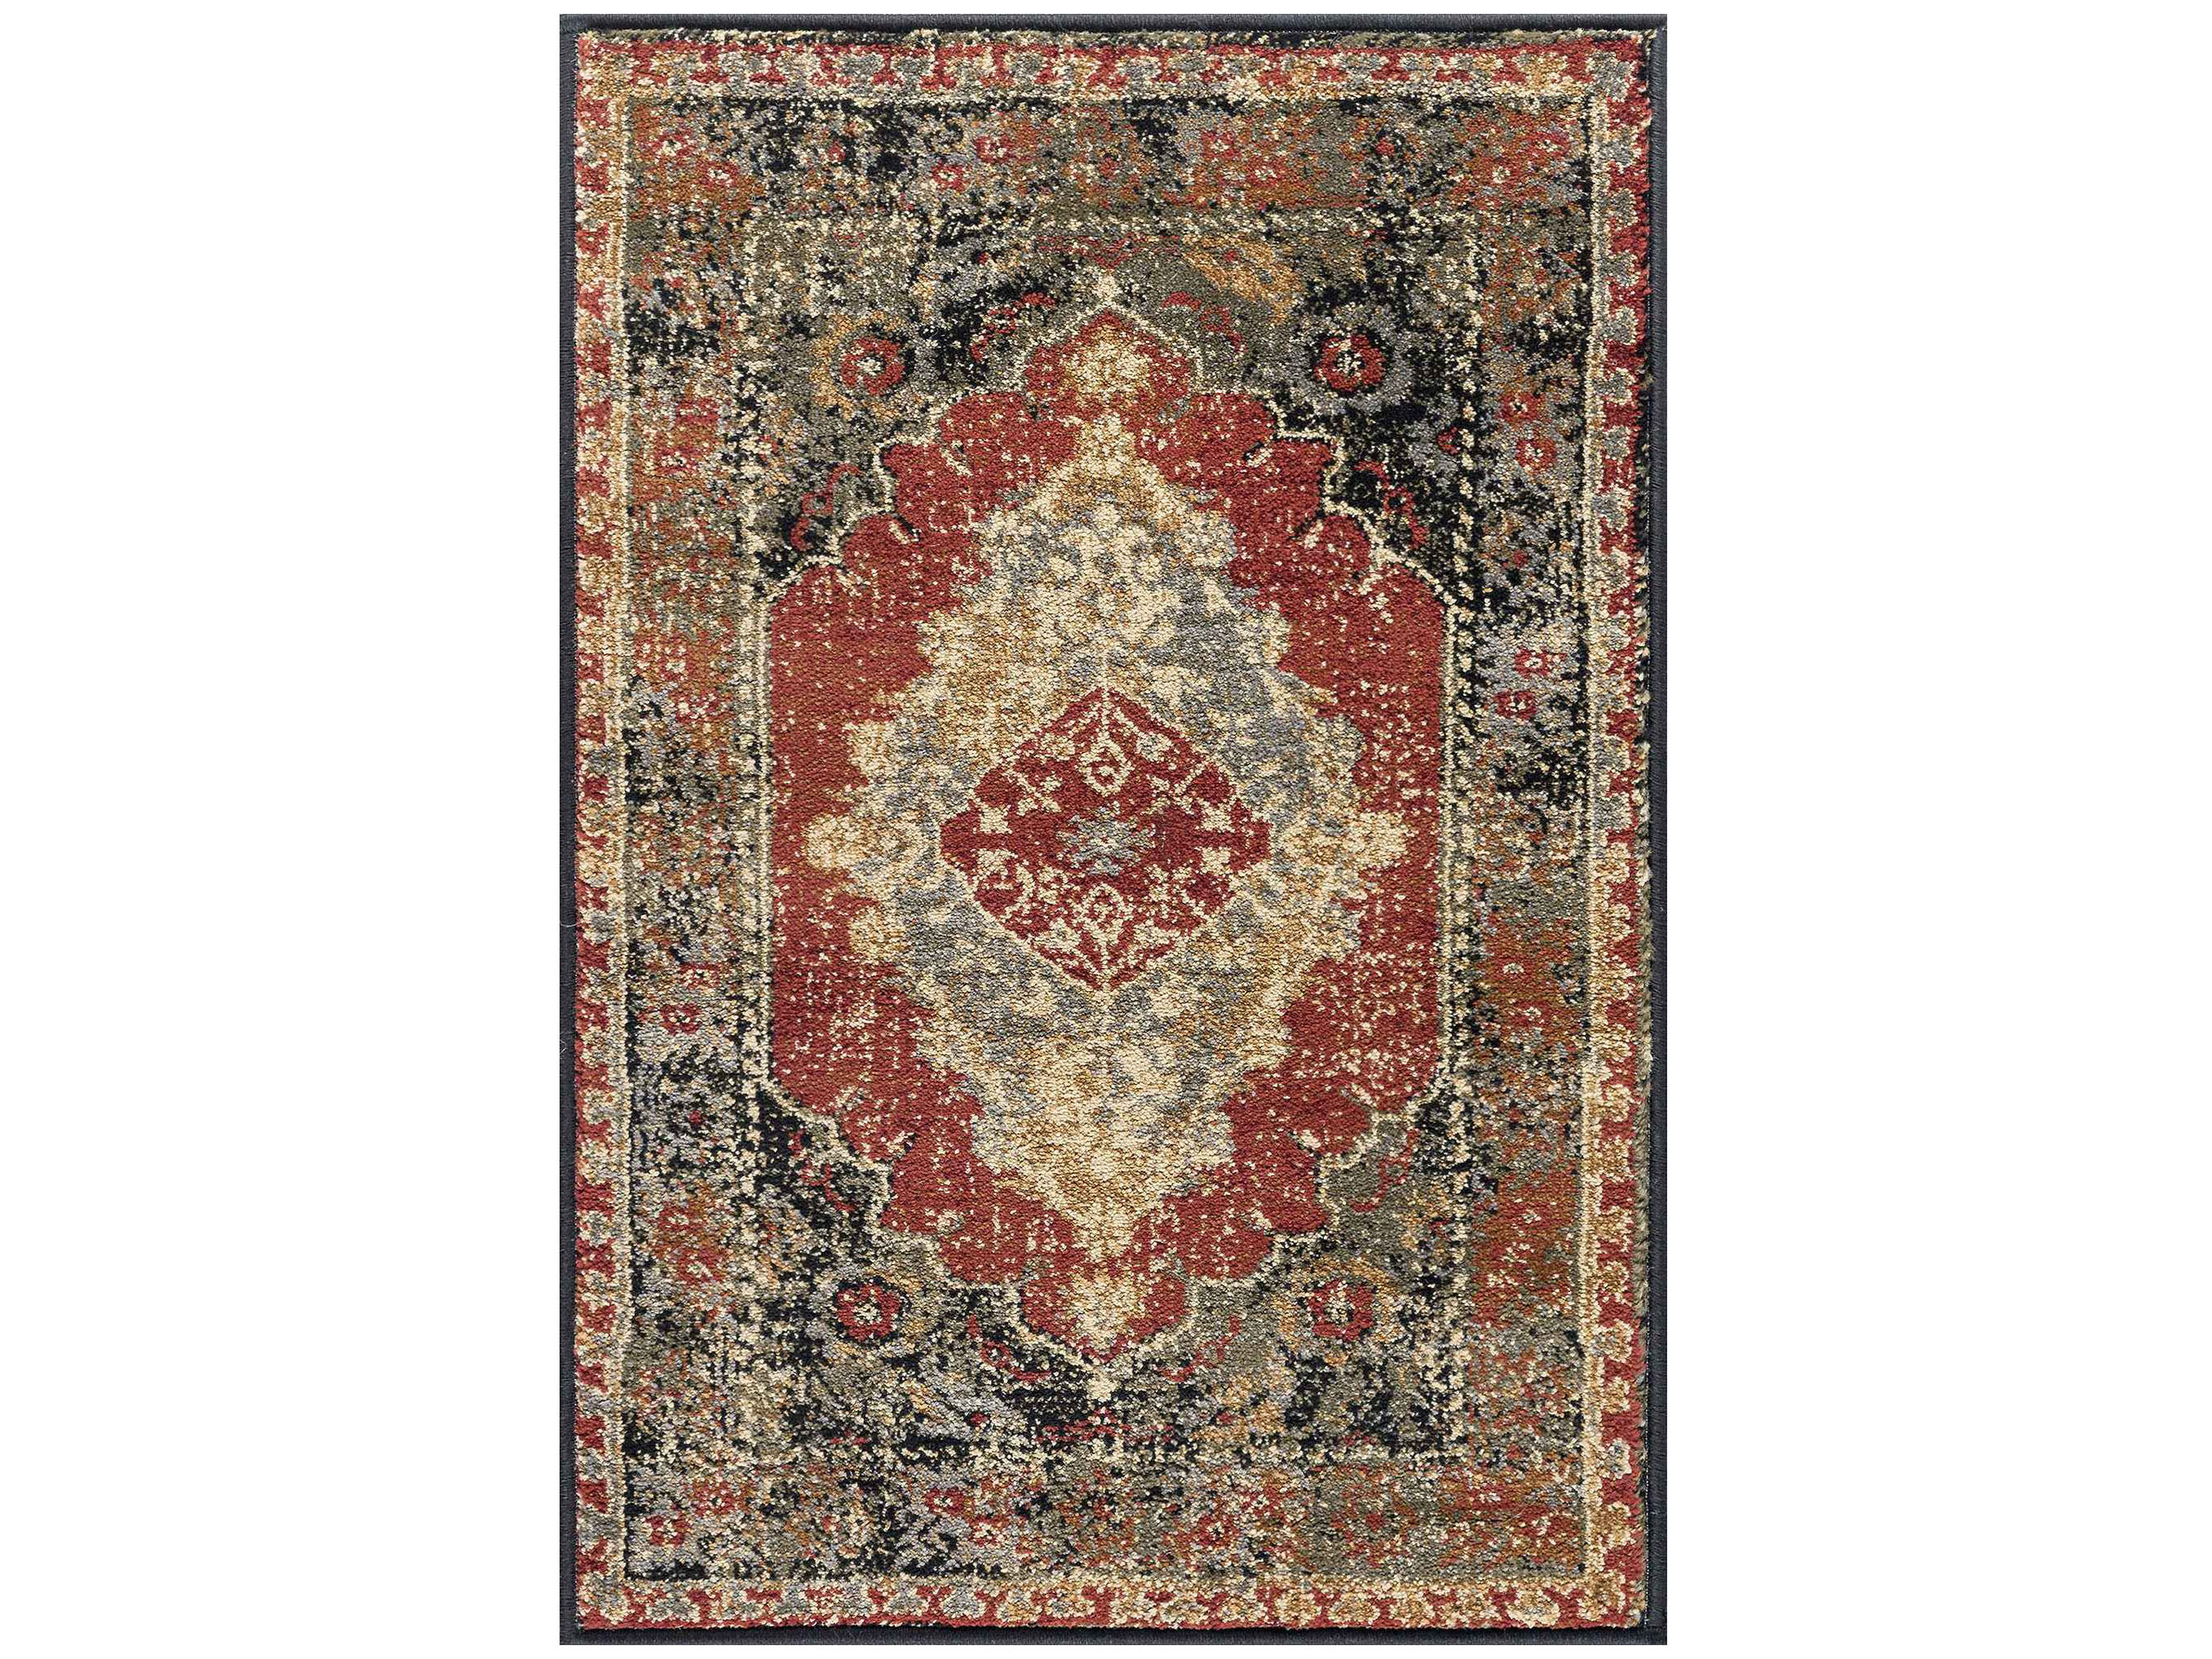 Tayse Rugs Sensation Orleans 2 ft. 3 in. x 10 ft. Traditional Area Rug Black